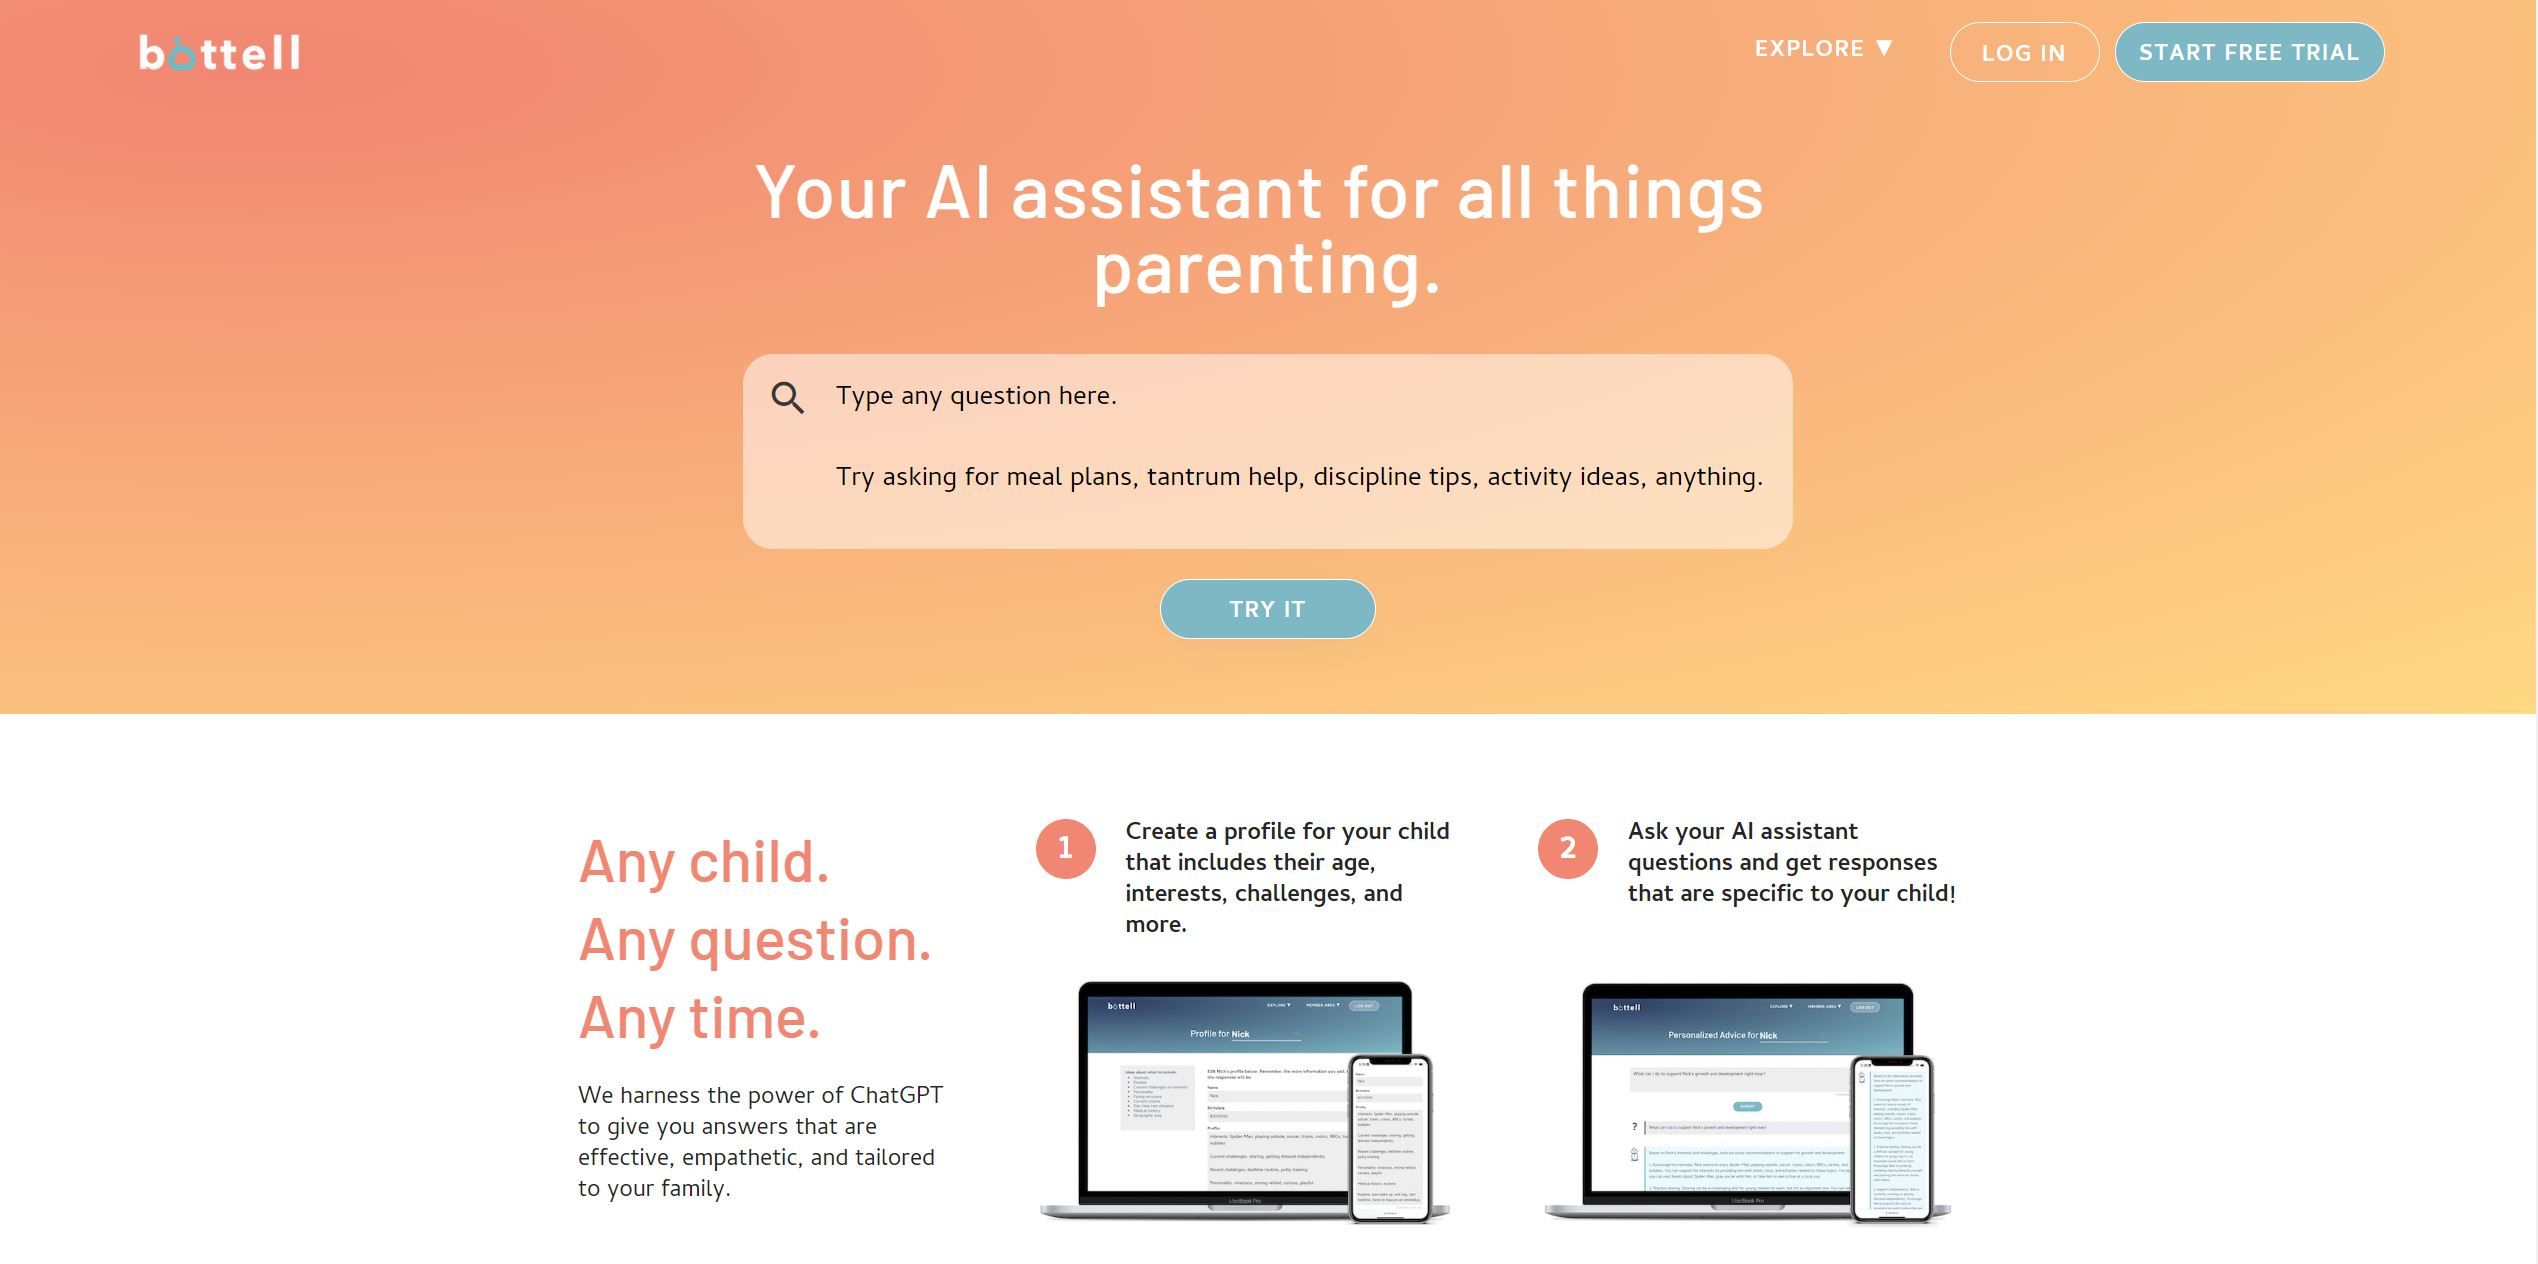  Your AI assistant for all things parenting.